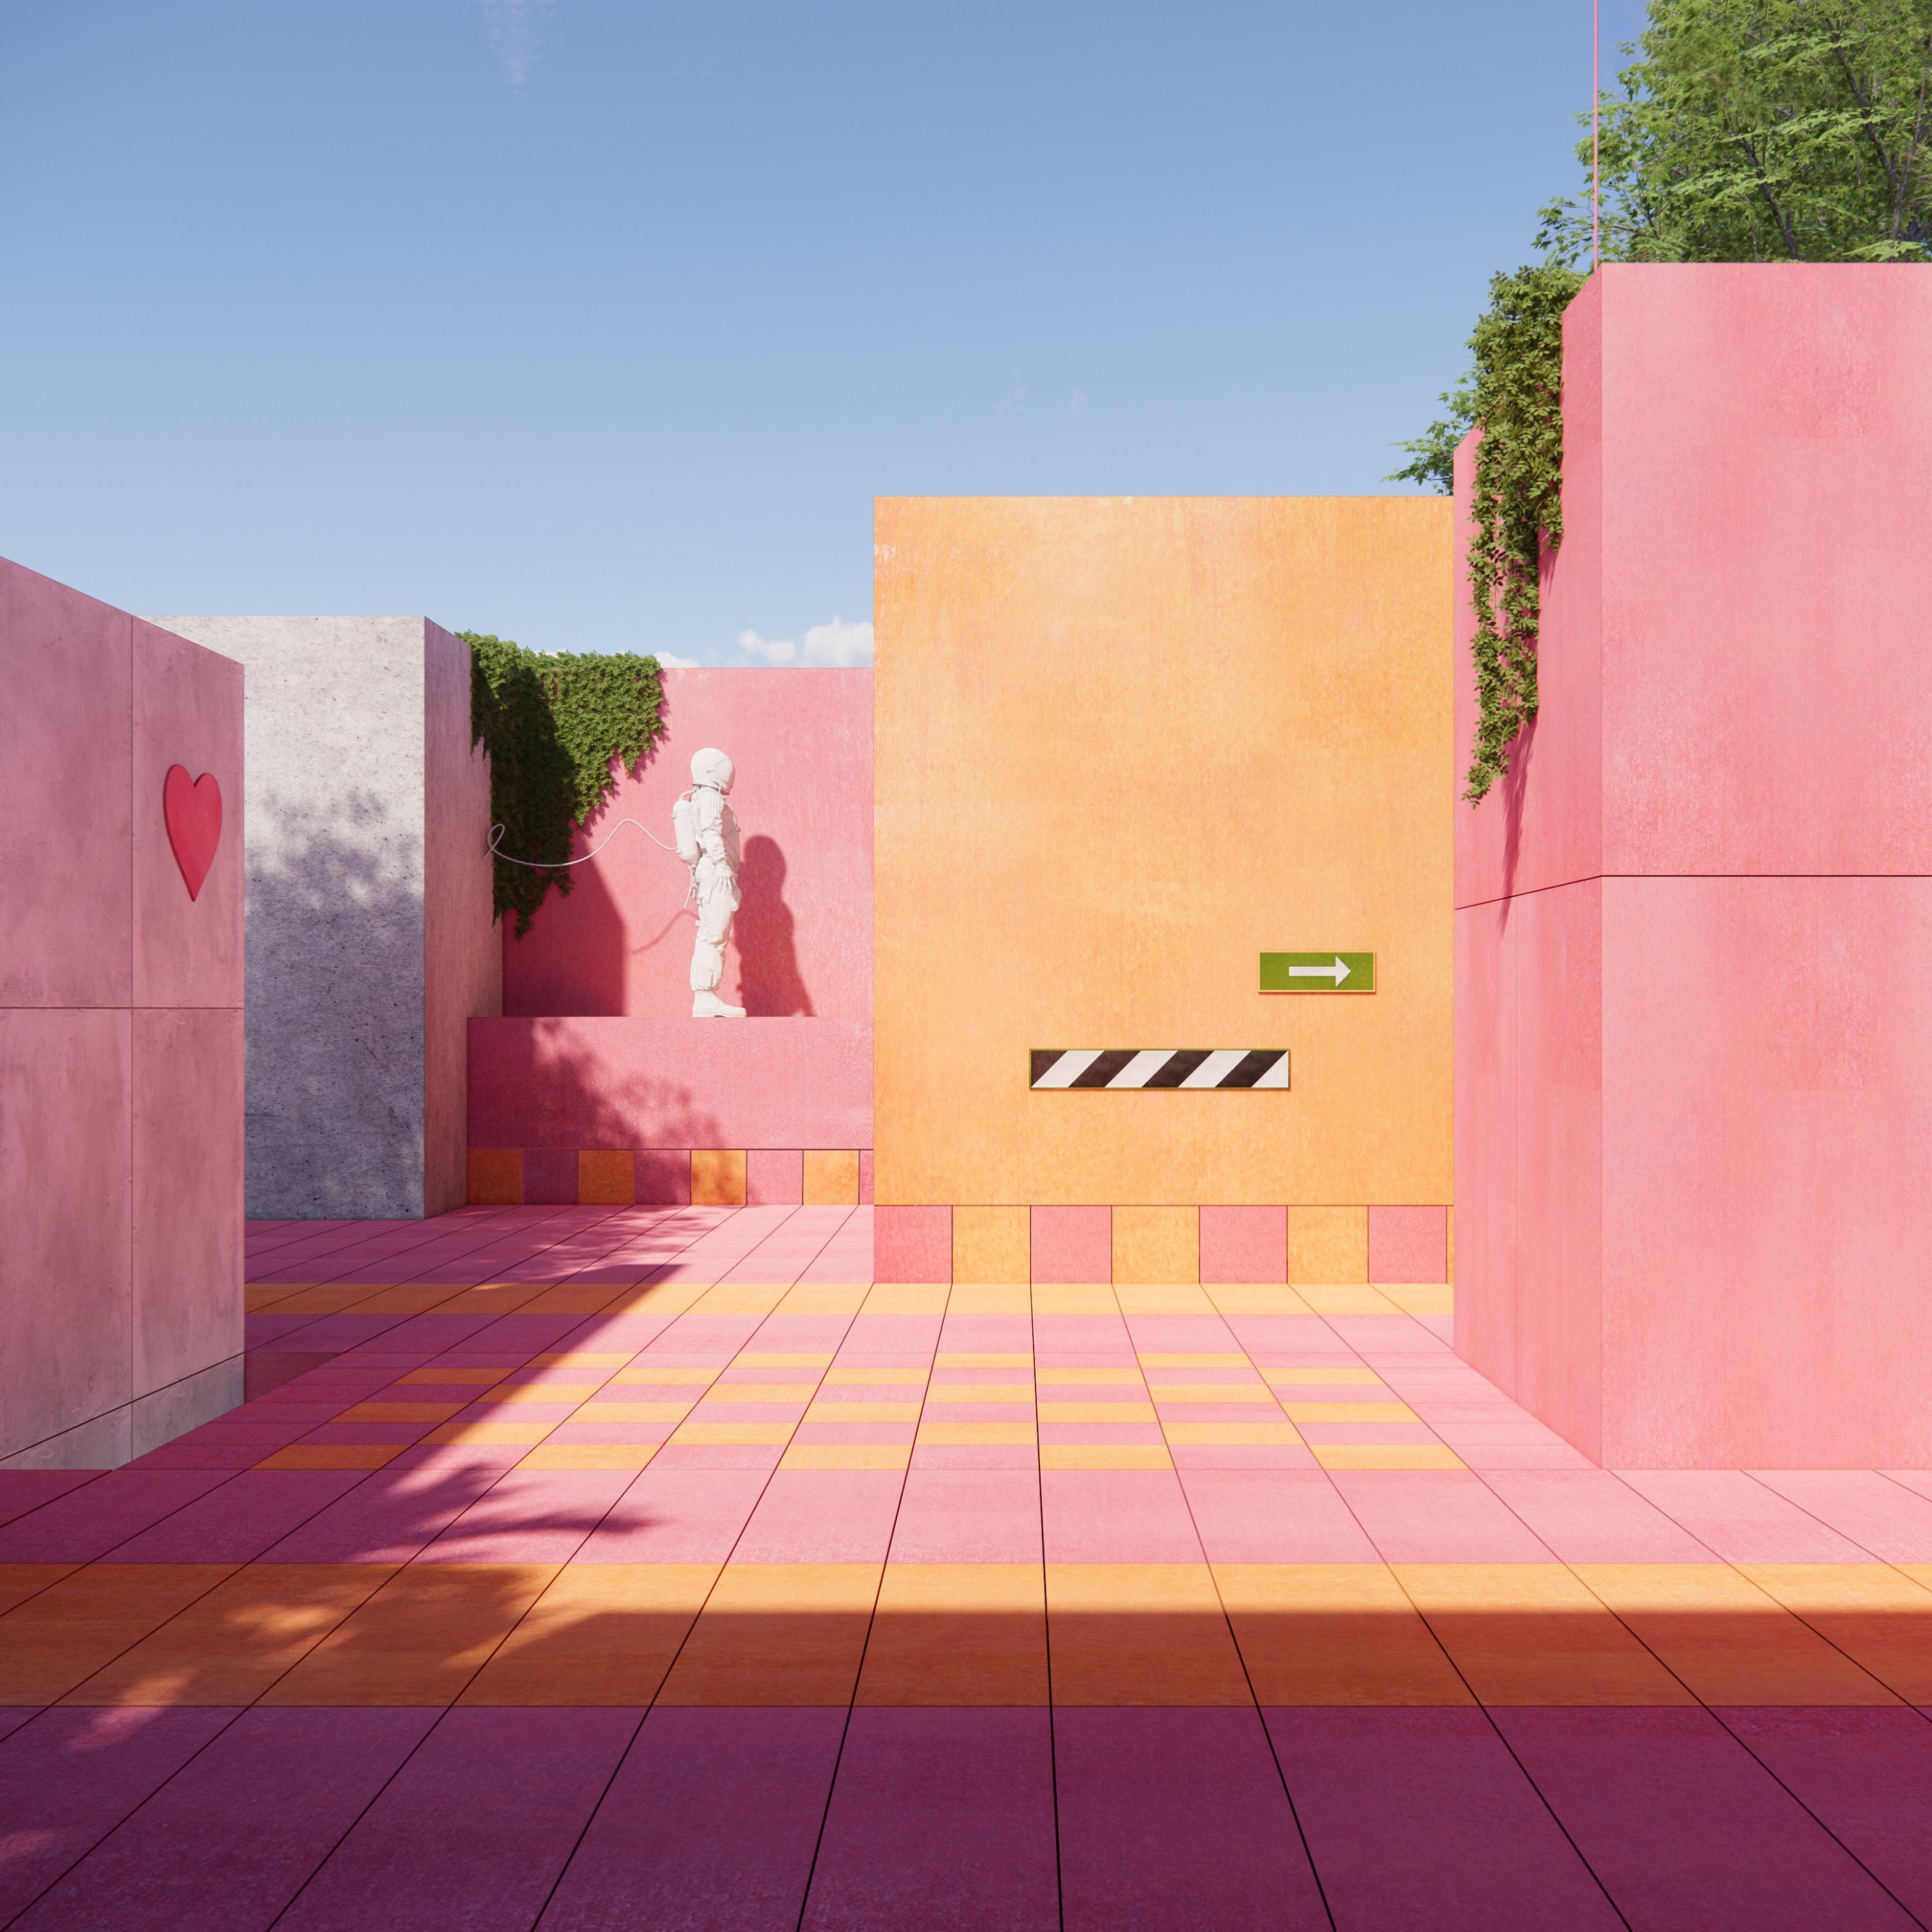 "EXIT 017: Astronaut Station" is a non-focal snapshot of a pink and open space accessorized with an astronaut statue near an arrow sign. It is suggestive of a series of rooms, and the sign is reminiscent of an exit sign without showing the exit. (Photo courtesy of Ceren Arslan)